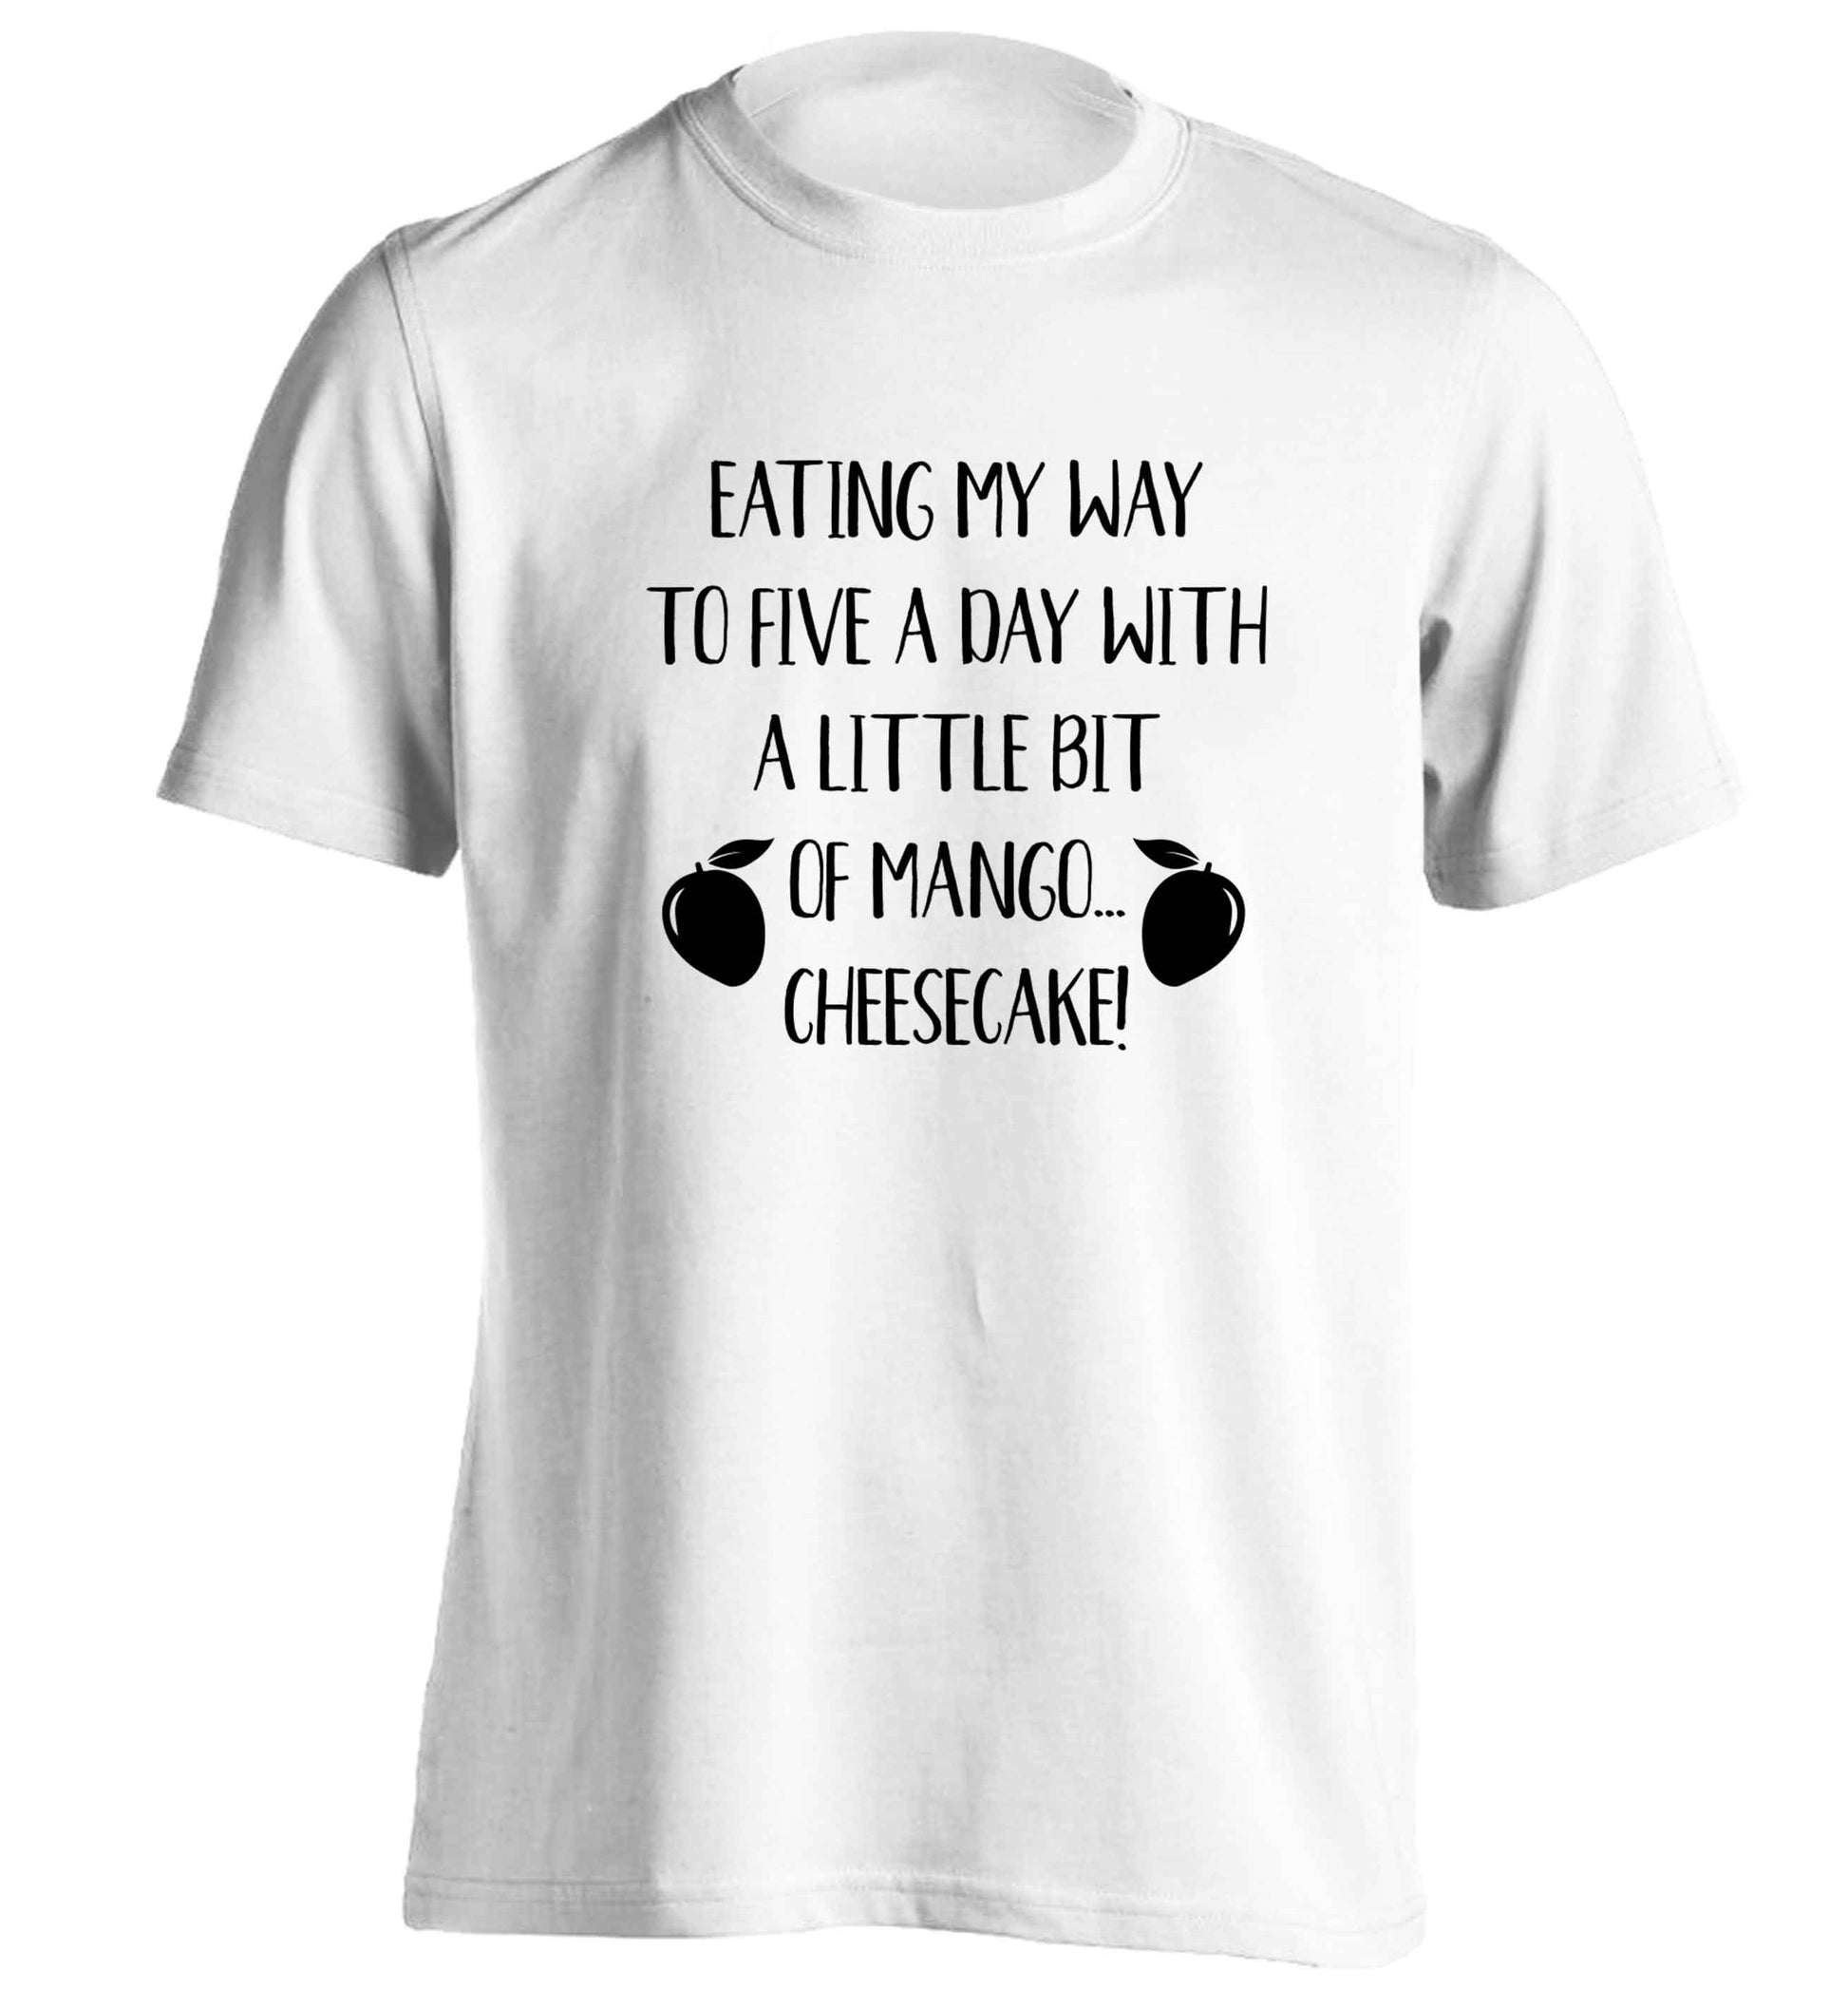 Eating my way to five a day with a little bit of mango cheesecake adults unisex white Tshirt 2XL